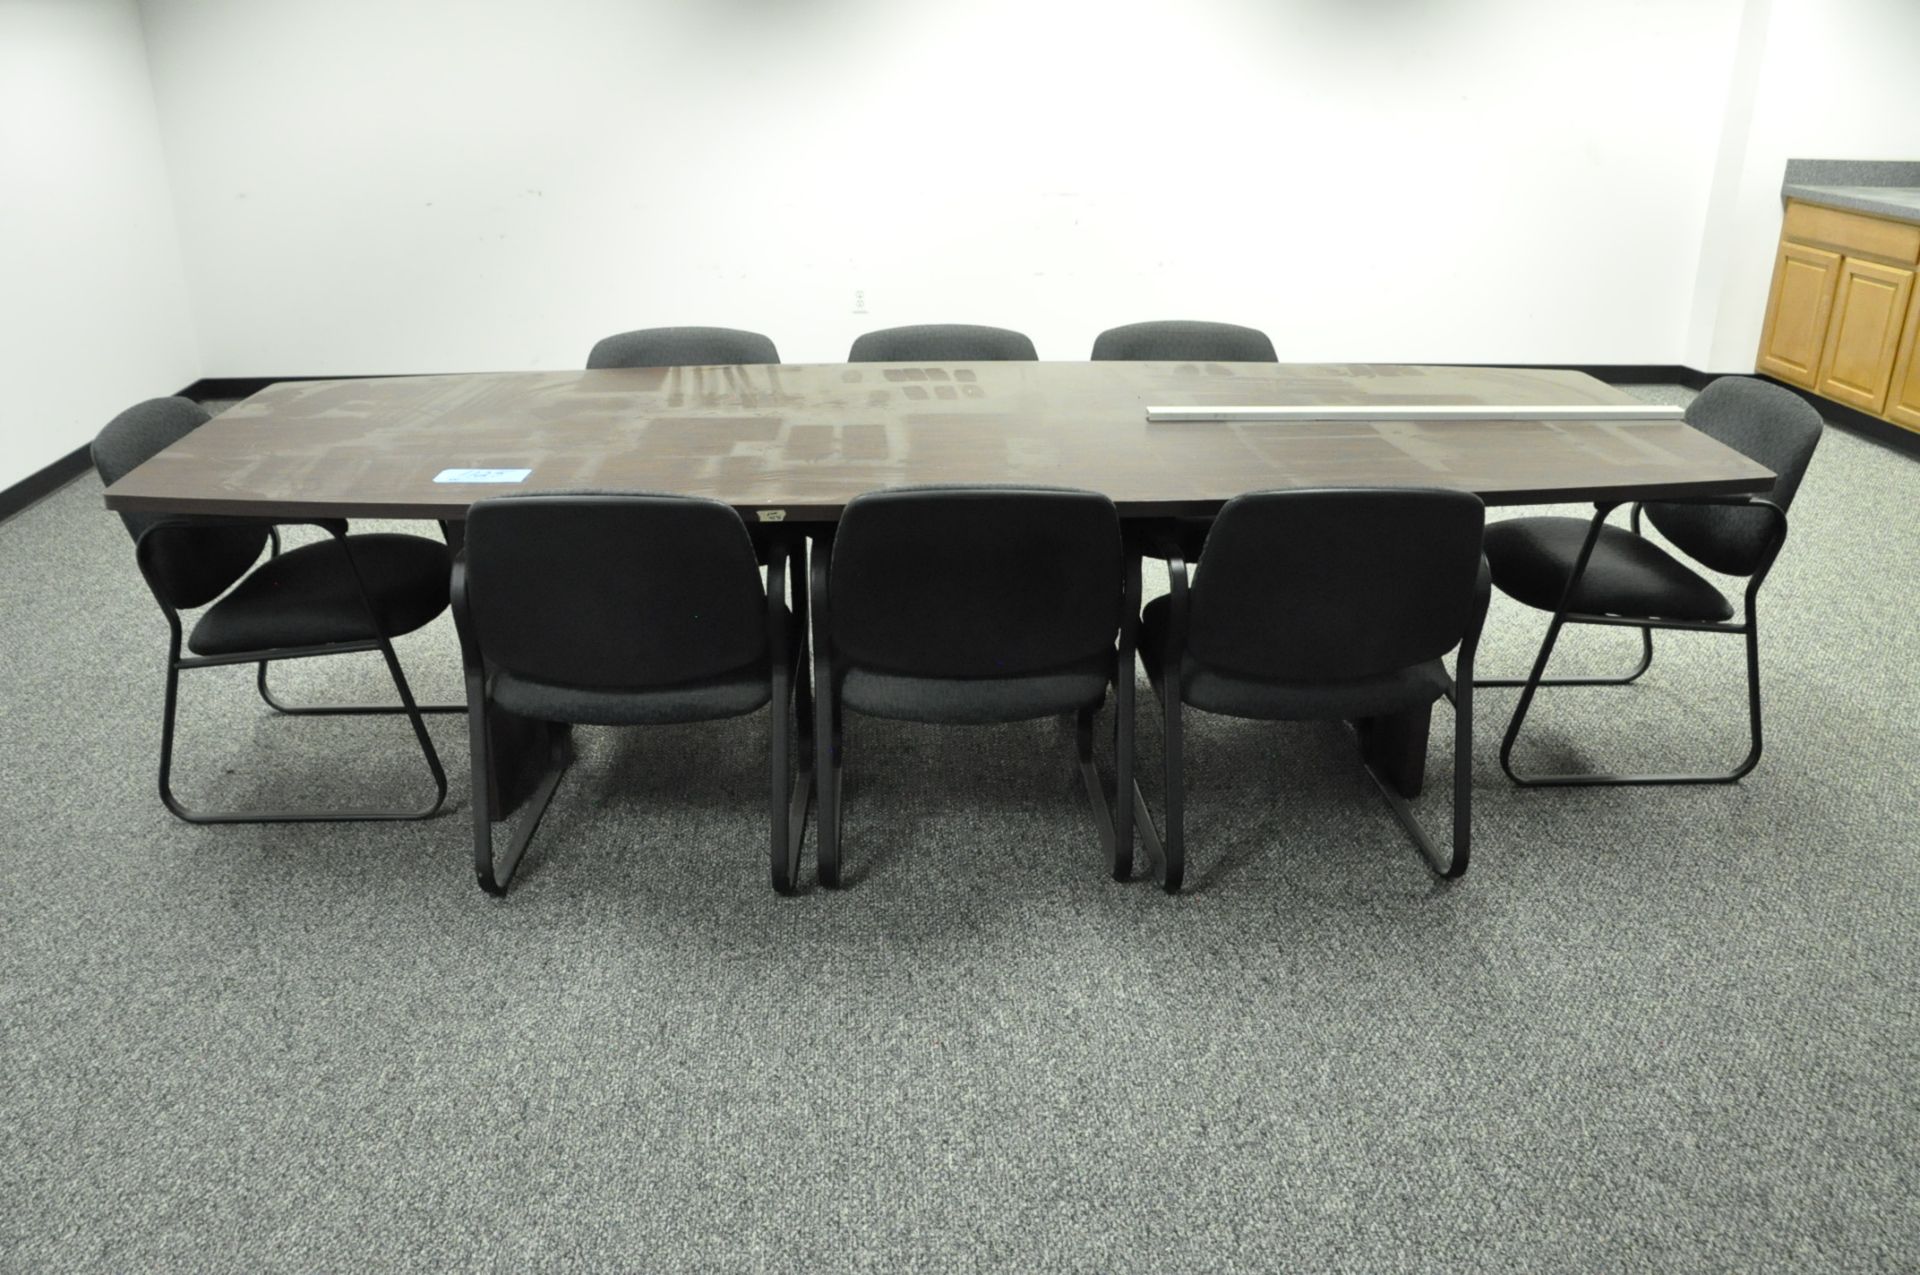 Lot-10' x 46" Conference Table with (8) Chairs, (Bldg 2) - Image 2 of 2